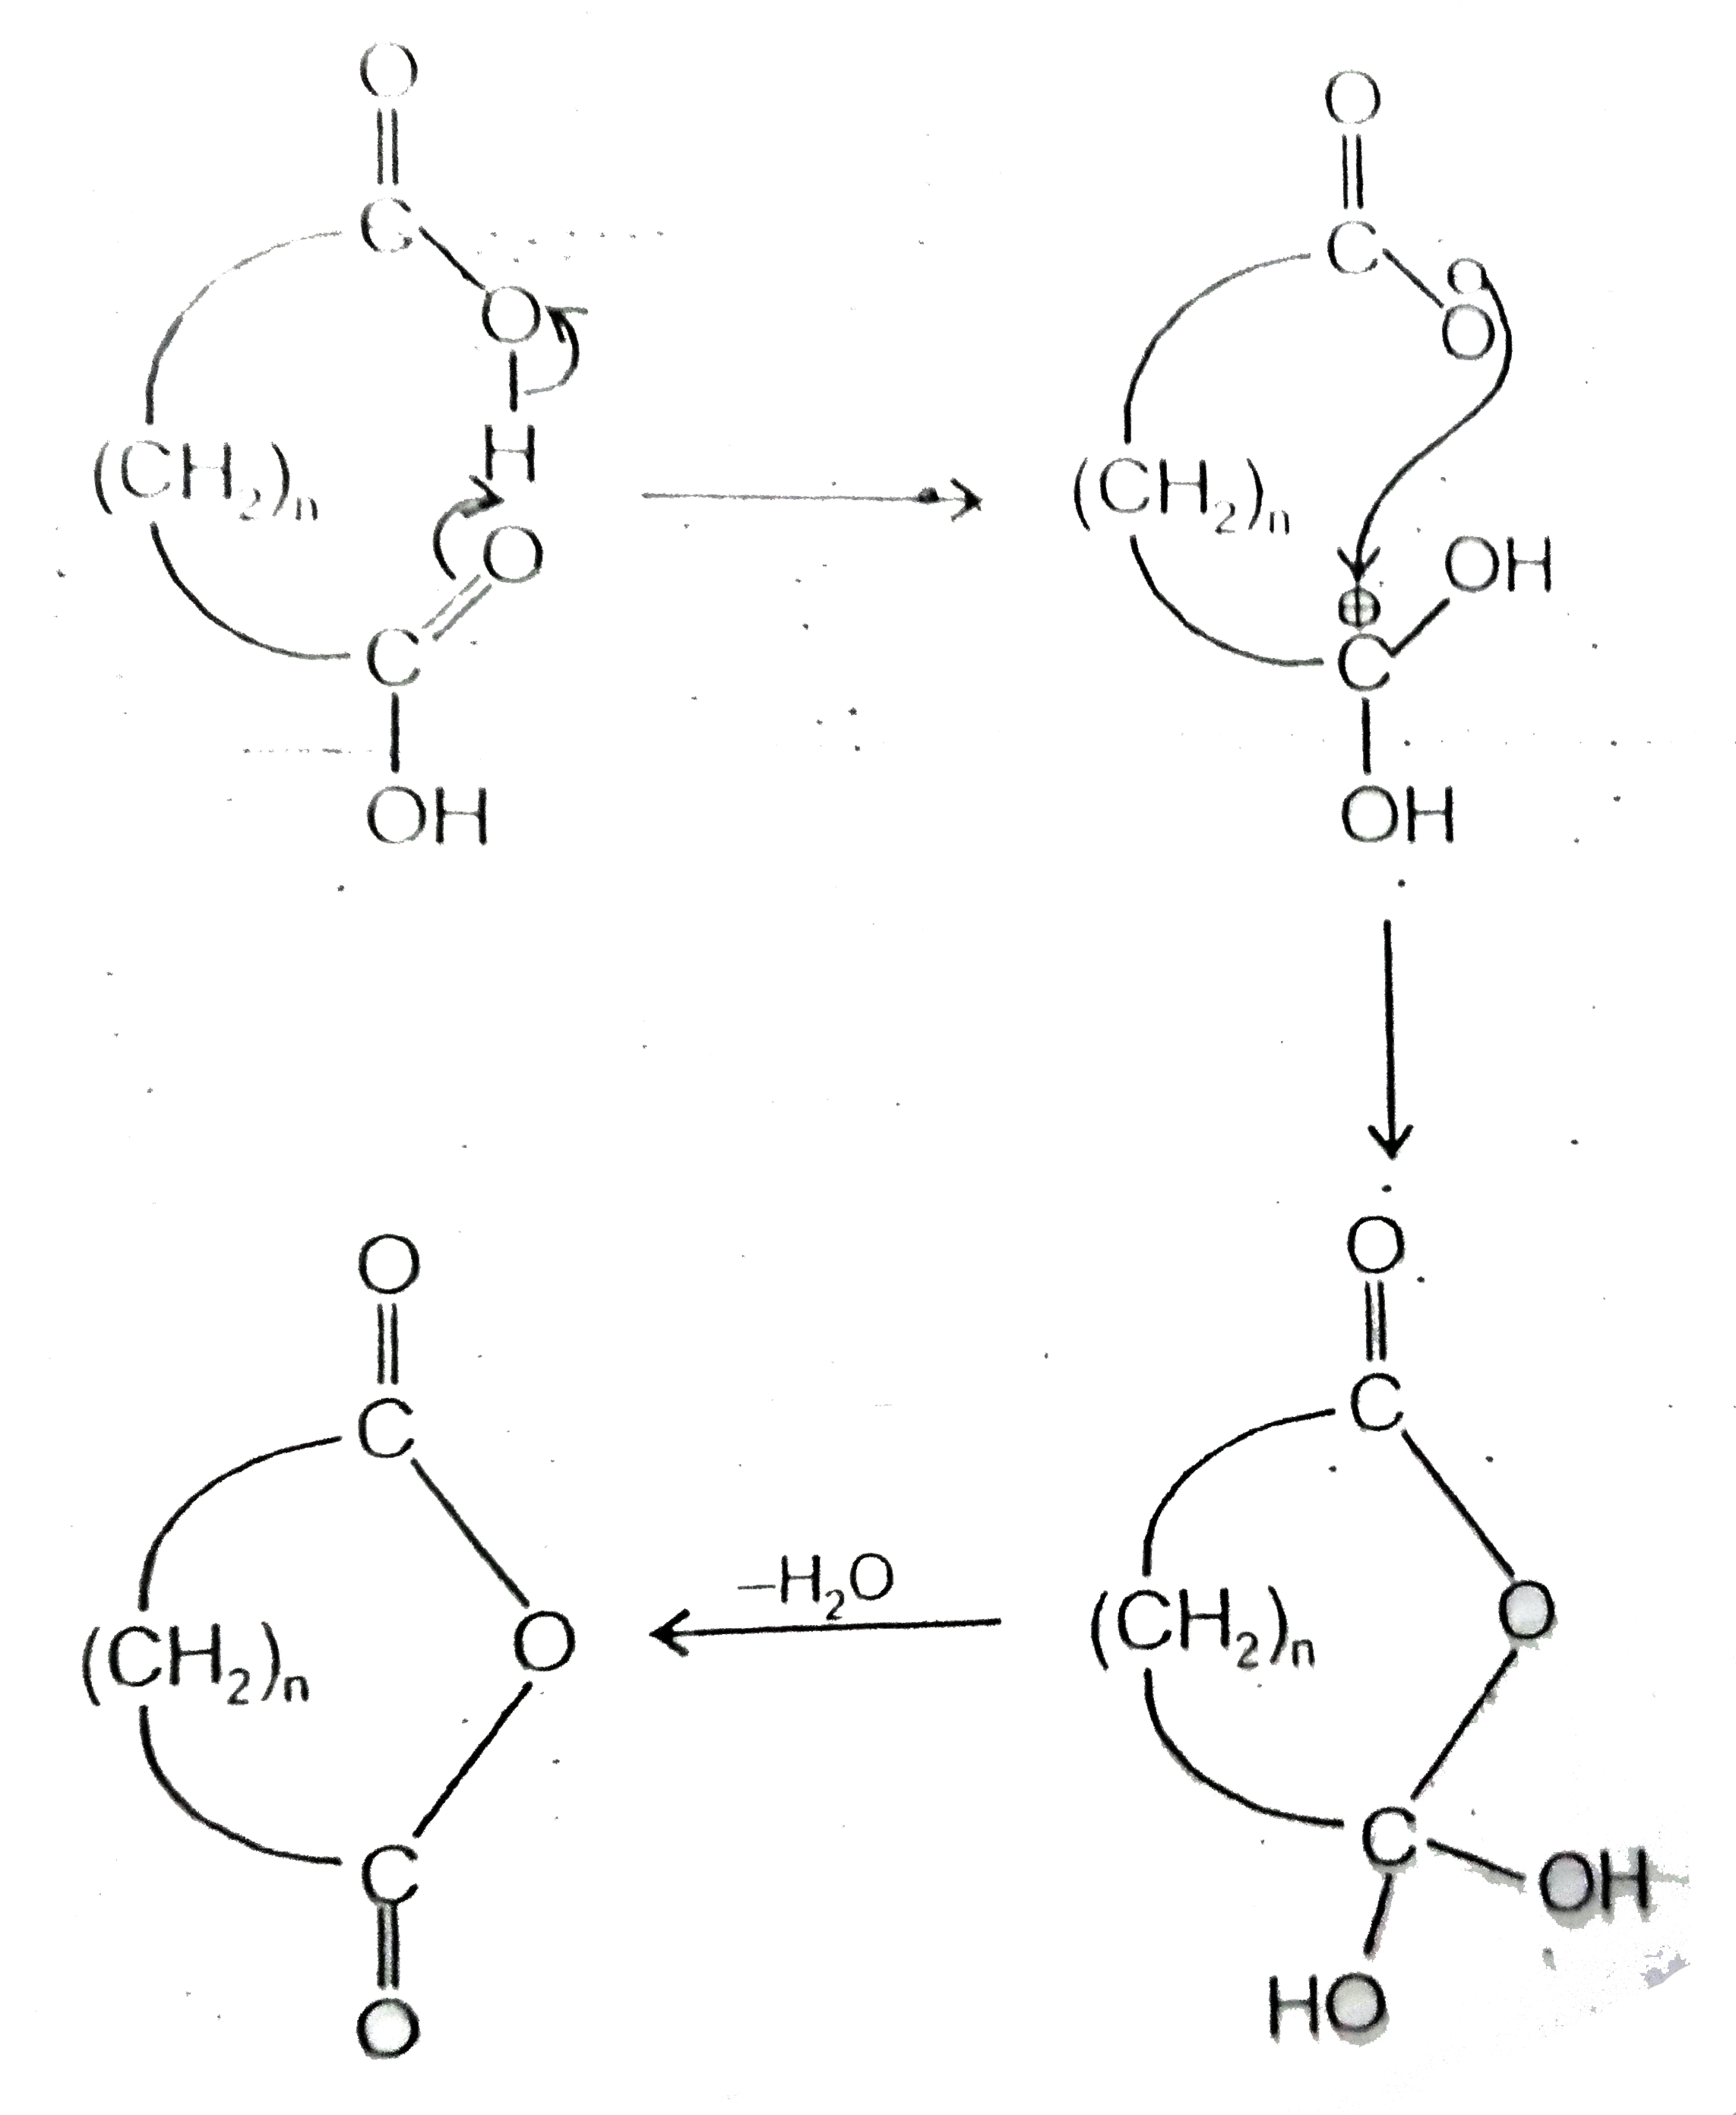 Certain  dicarboxylic acids spontaneously eliminate water when heated forming cycioc anhydirides. But for the reaction to be successfully. The cyclic anhydrides product must normally have a ring size of fivee or six members. There are two important reasons, first, the second carboxyl group can serve as the acid catalyst (by intramolecular proton transfer), as well as the nucleophile. And second, the high temperature involved reduce the need for catalyst.      Which of the following dicarboxylic acid would you expect to form cyclic anhydride?